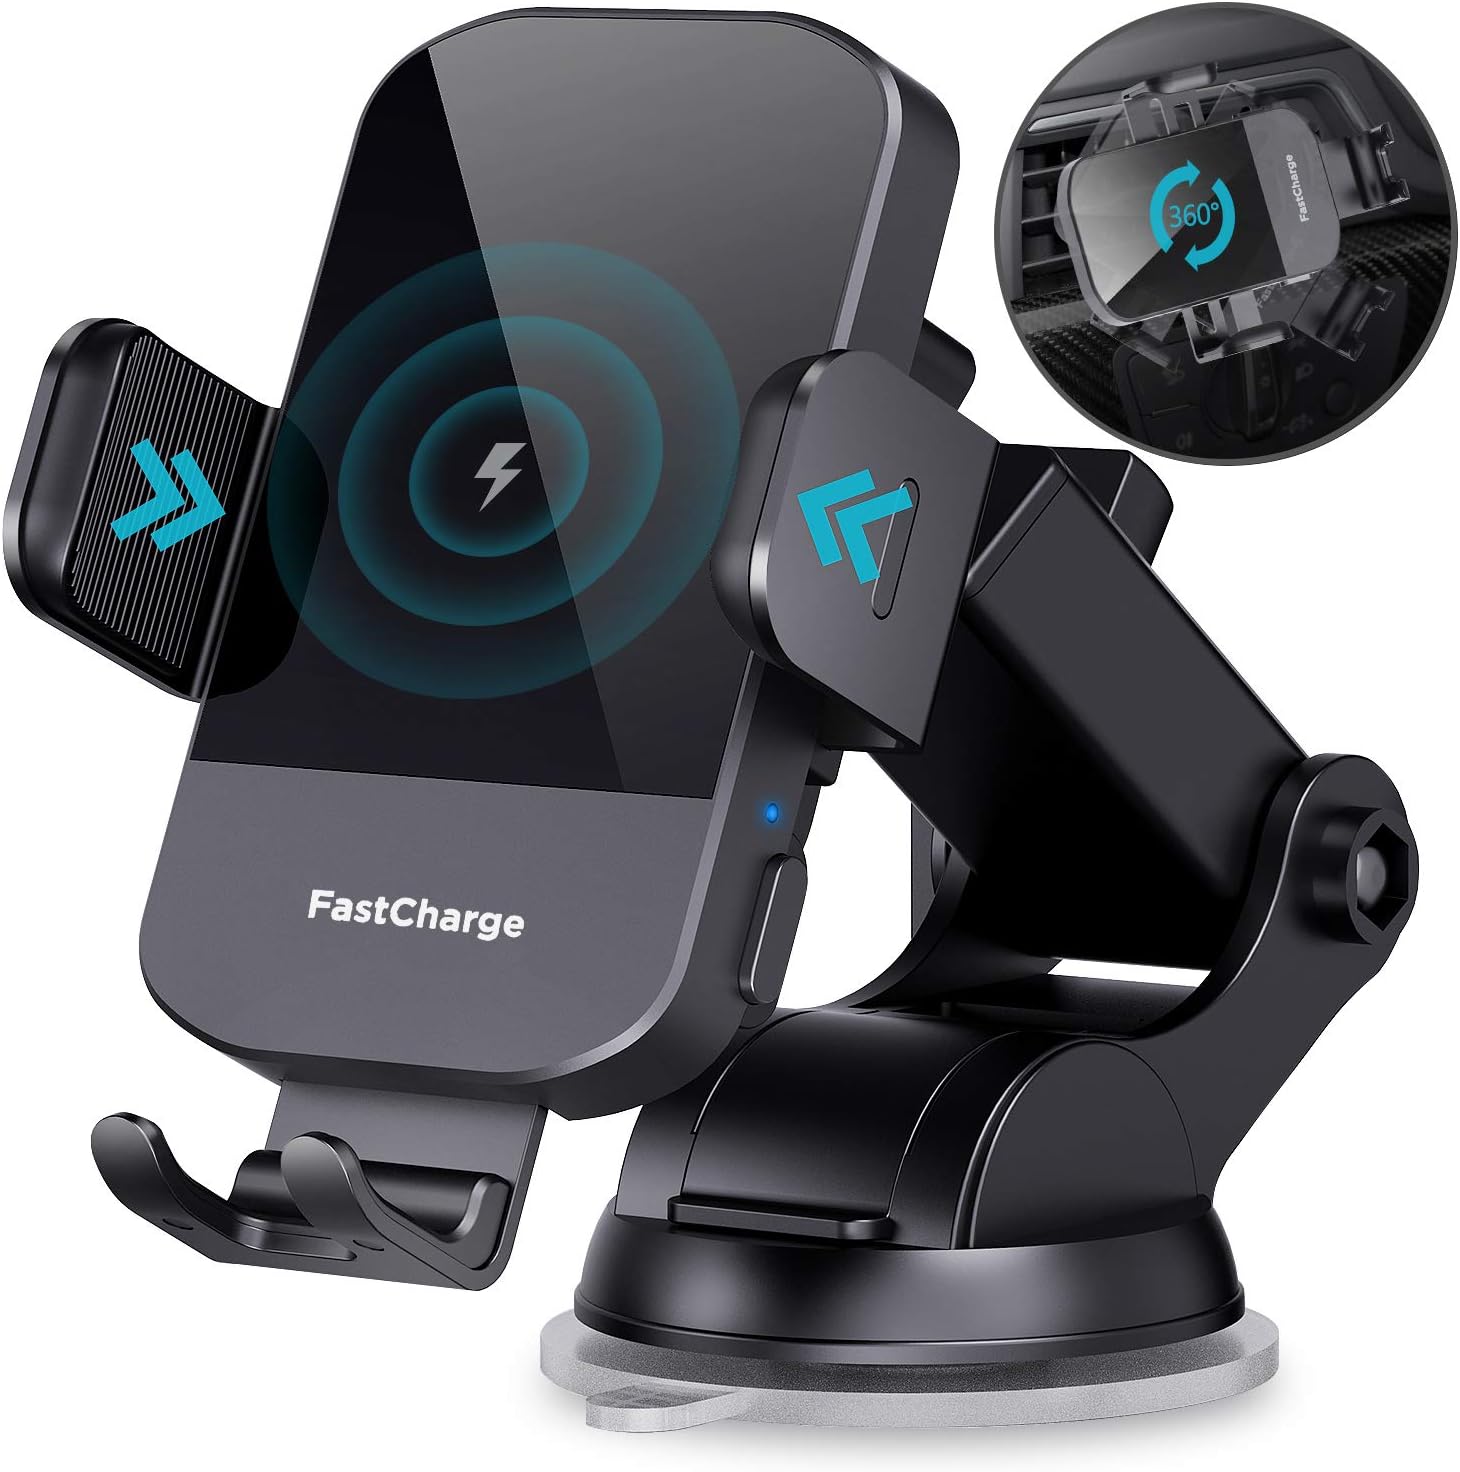 Wireless Car Charger 2 in 1 Qi 15W Fast Wireless Auto-Clamping Charge Car Air Vent Mount Automatic Sensor Phone Holder for iPhone 12 Pro Max Mini 11/11 Pro XS/XR Samsung Galaxy S9/S9+/S8/S8+/S7+